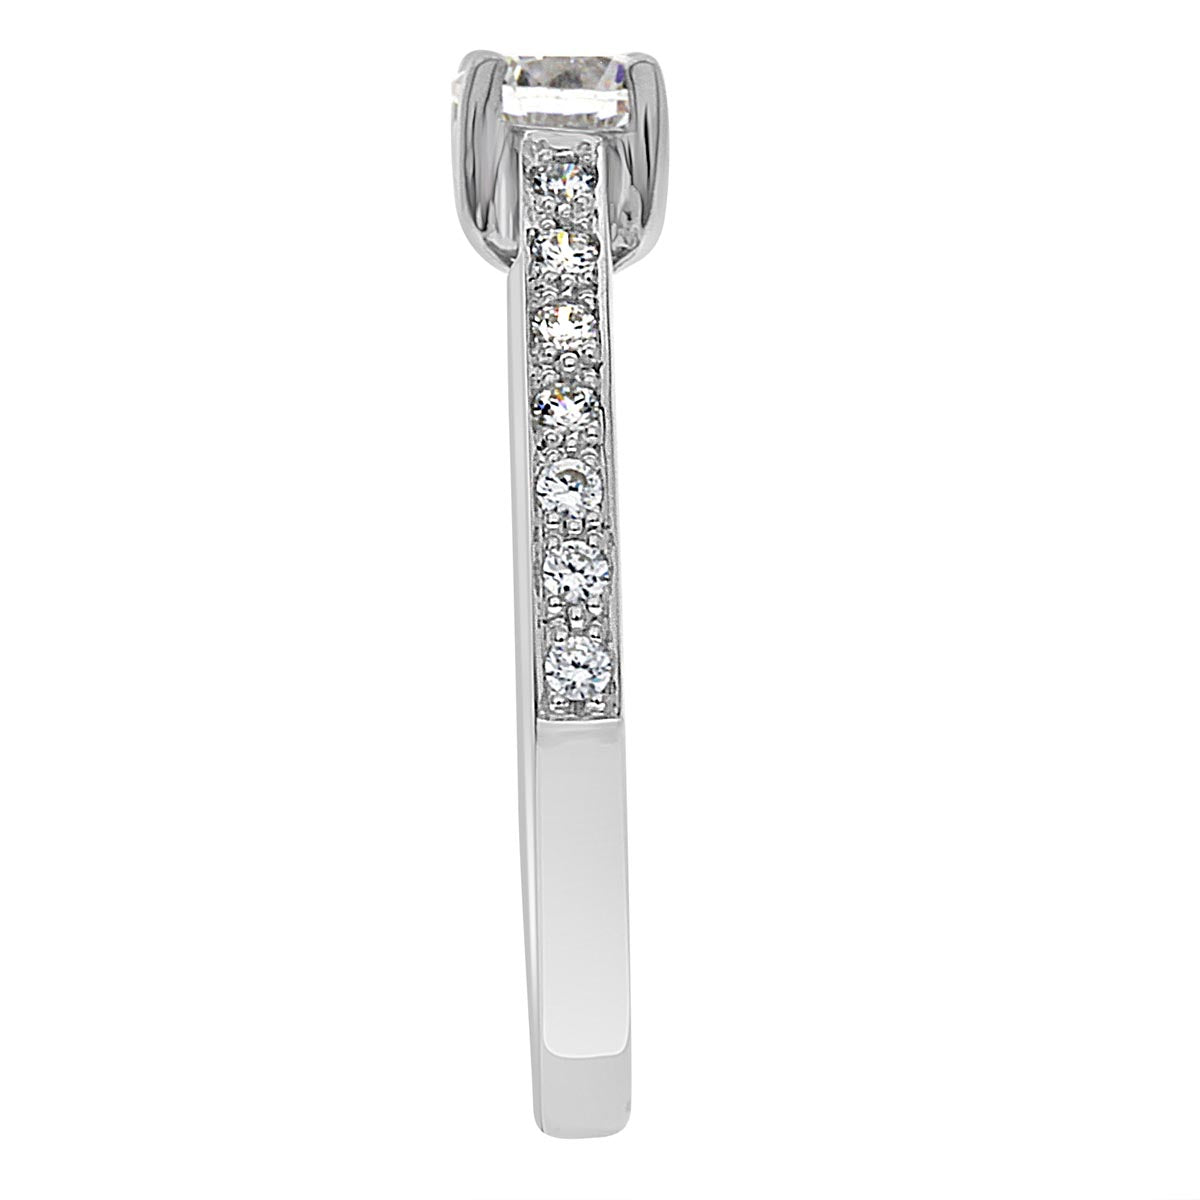 Pavé Diamond Ring manufactured in white gold upright and viewed from the side